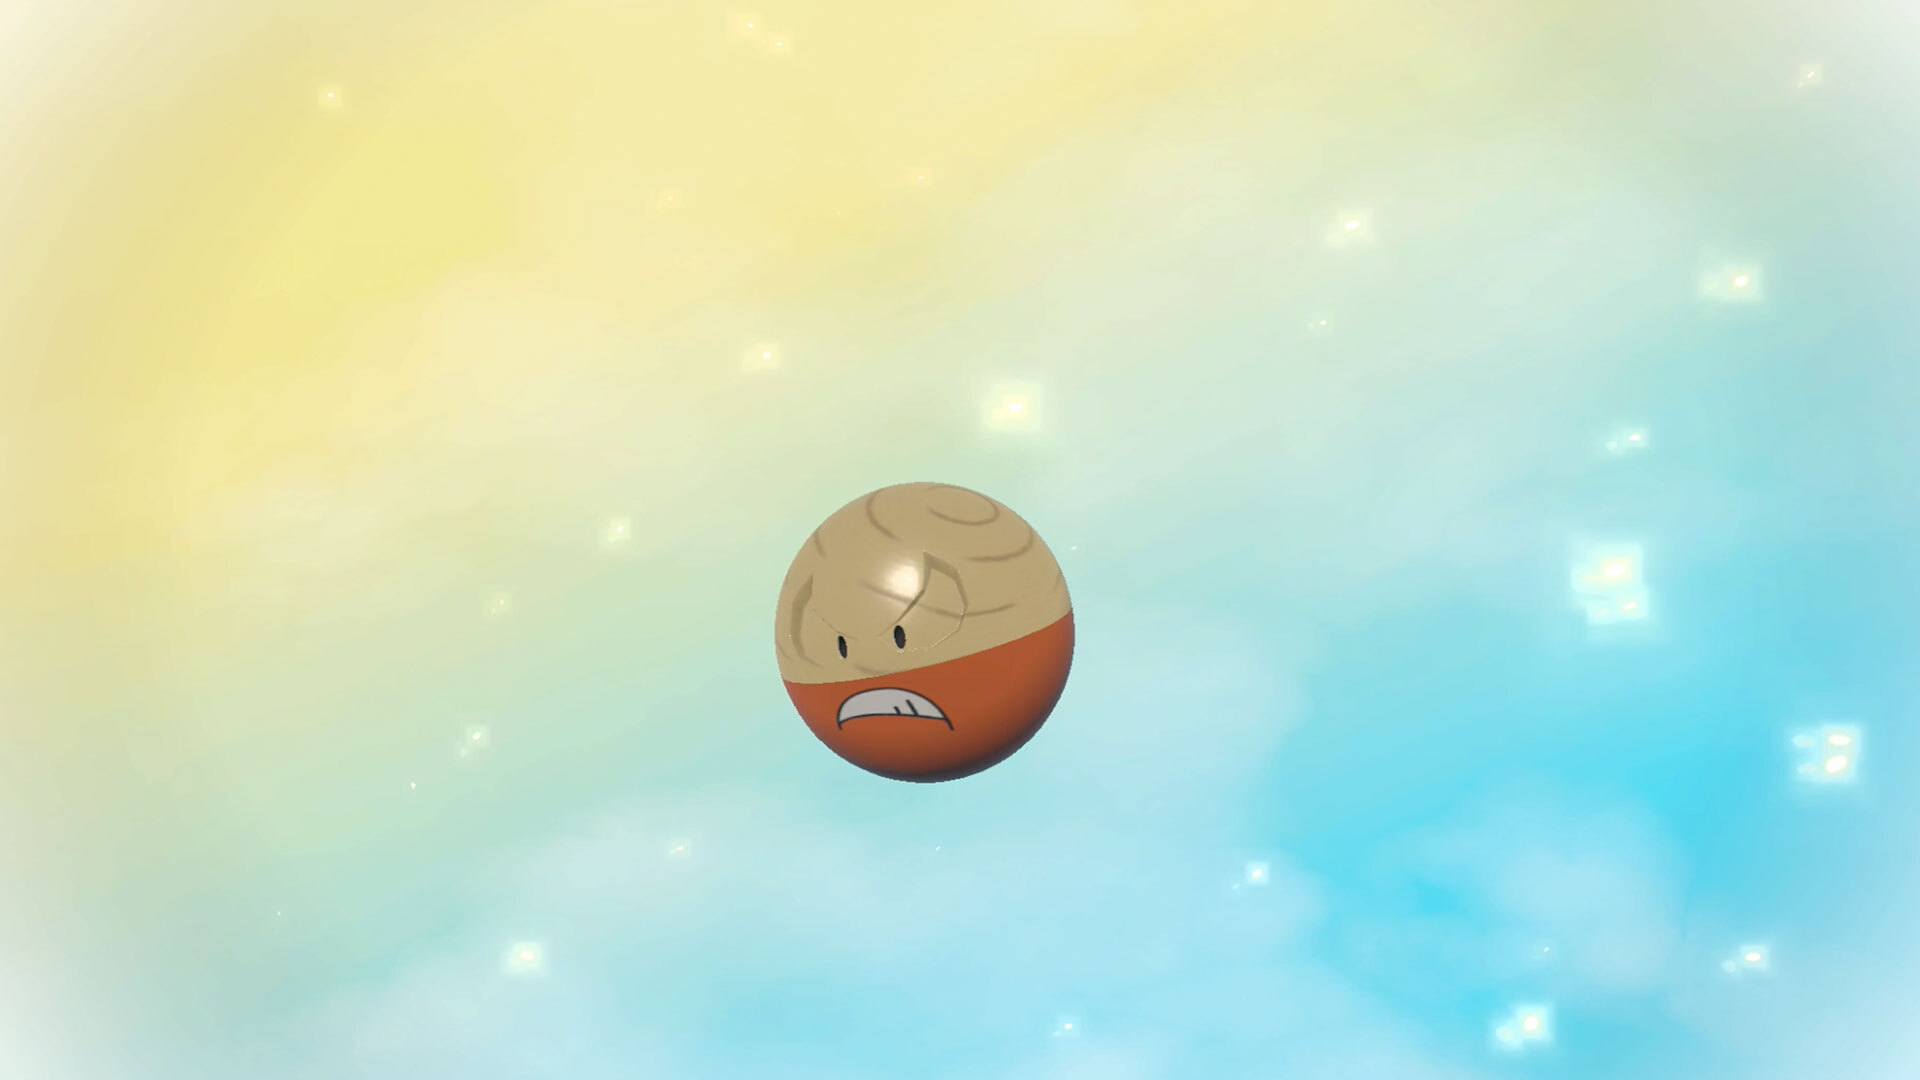 Voltorb found in the Hisui region of the Pokémon Legends: Arceus game have  appeared! – Pokémon GO